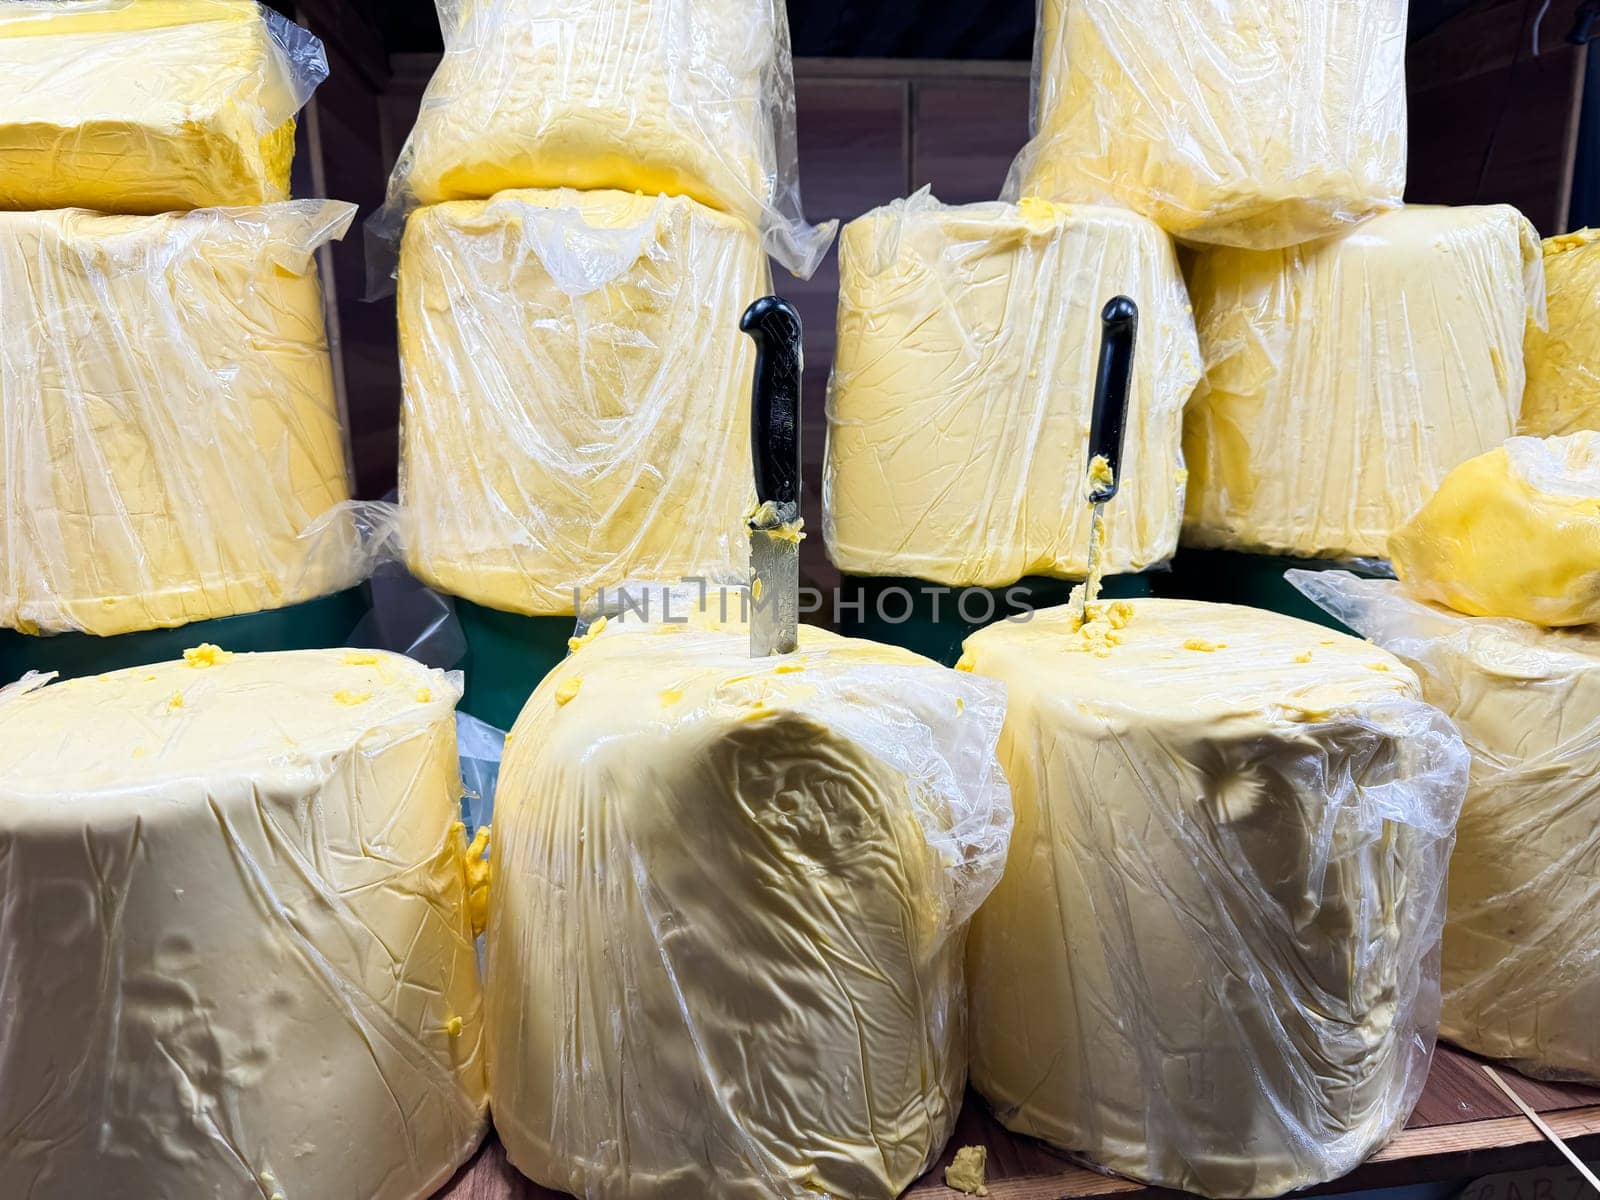 Large blocks of butter wrapped in plastic packet with knives inserted, displayed on wooden shelf at market stall. Food industry. High quality photo